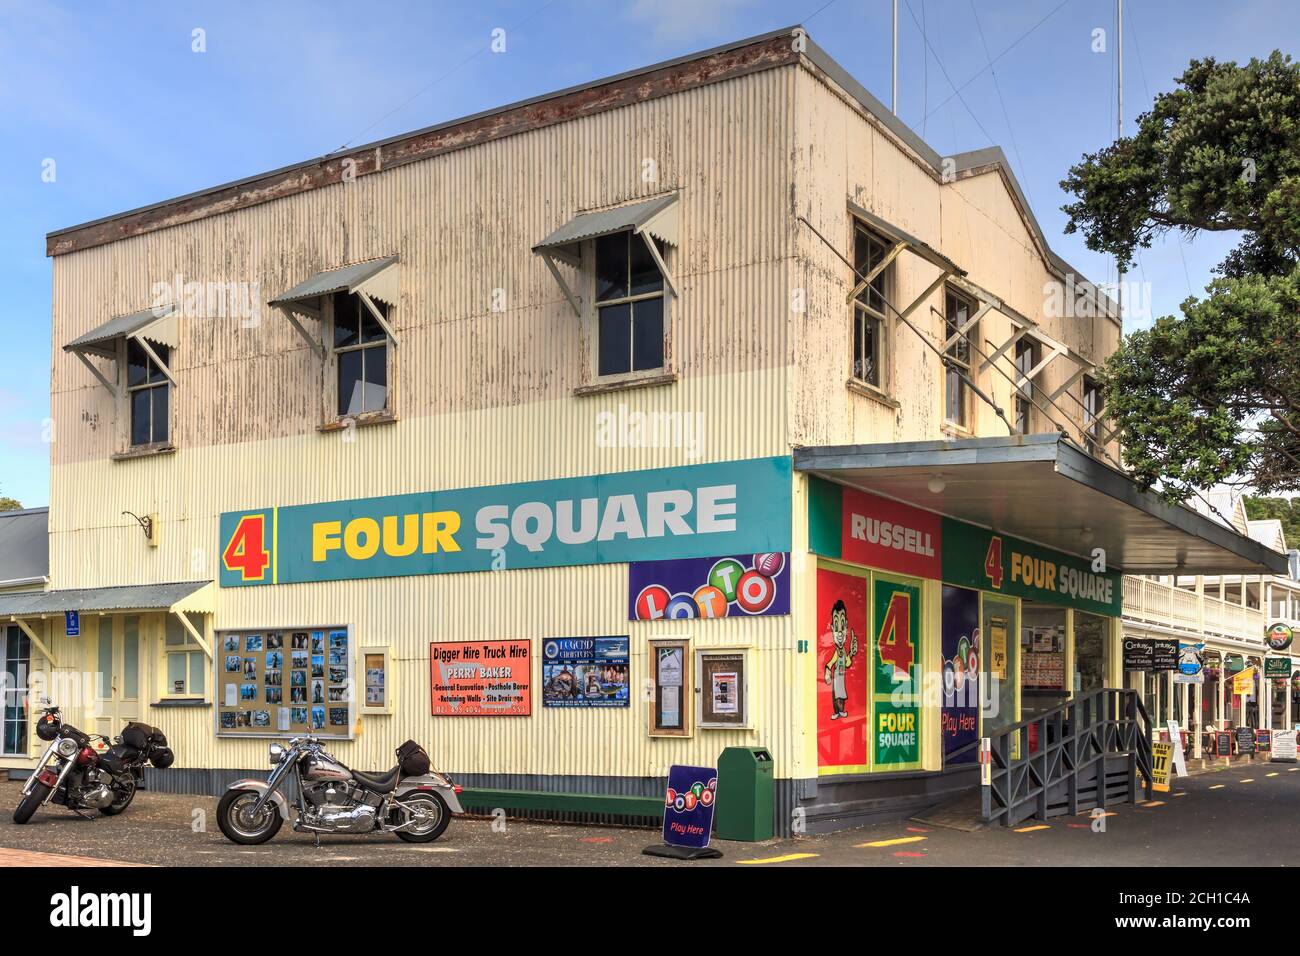 A 'Four Square' supermarket in Russell, Bay of Islands, New Zealand, with rustic corrugated iron walls Stock Photo